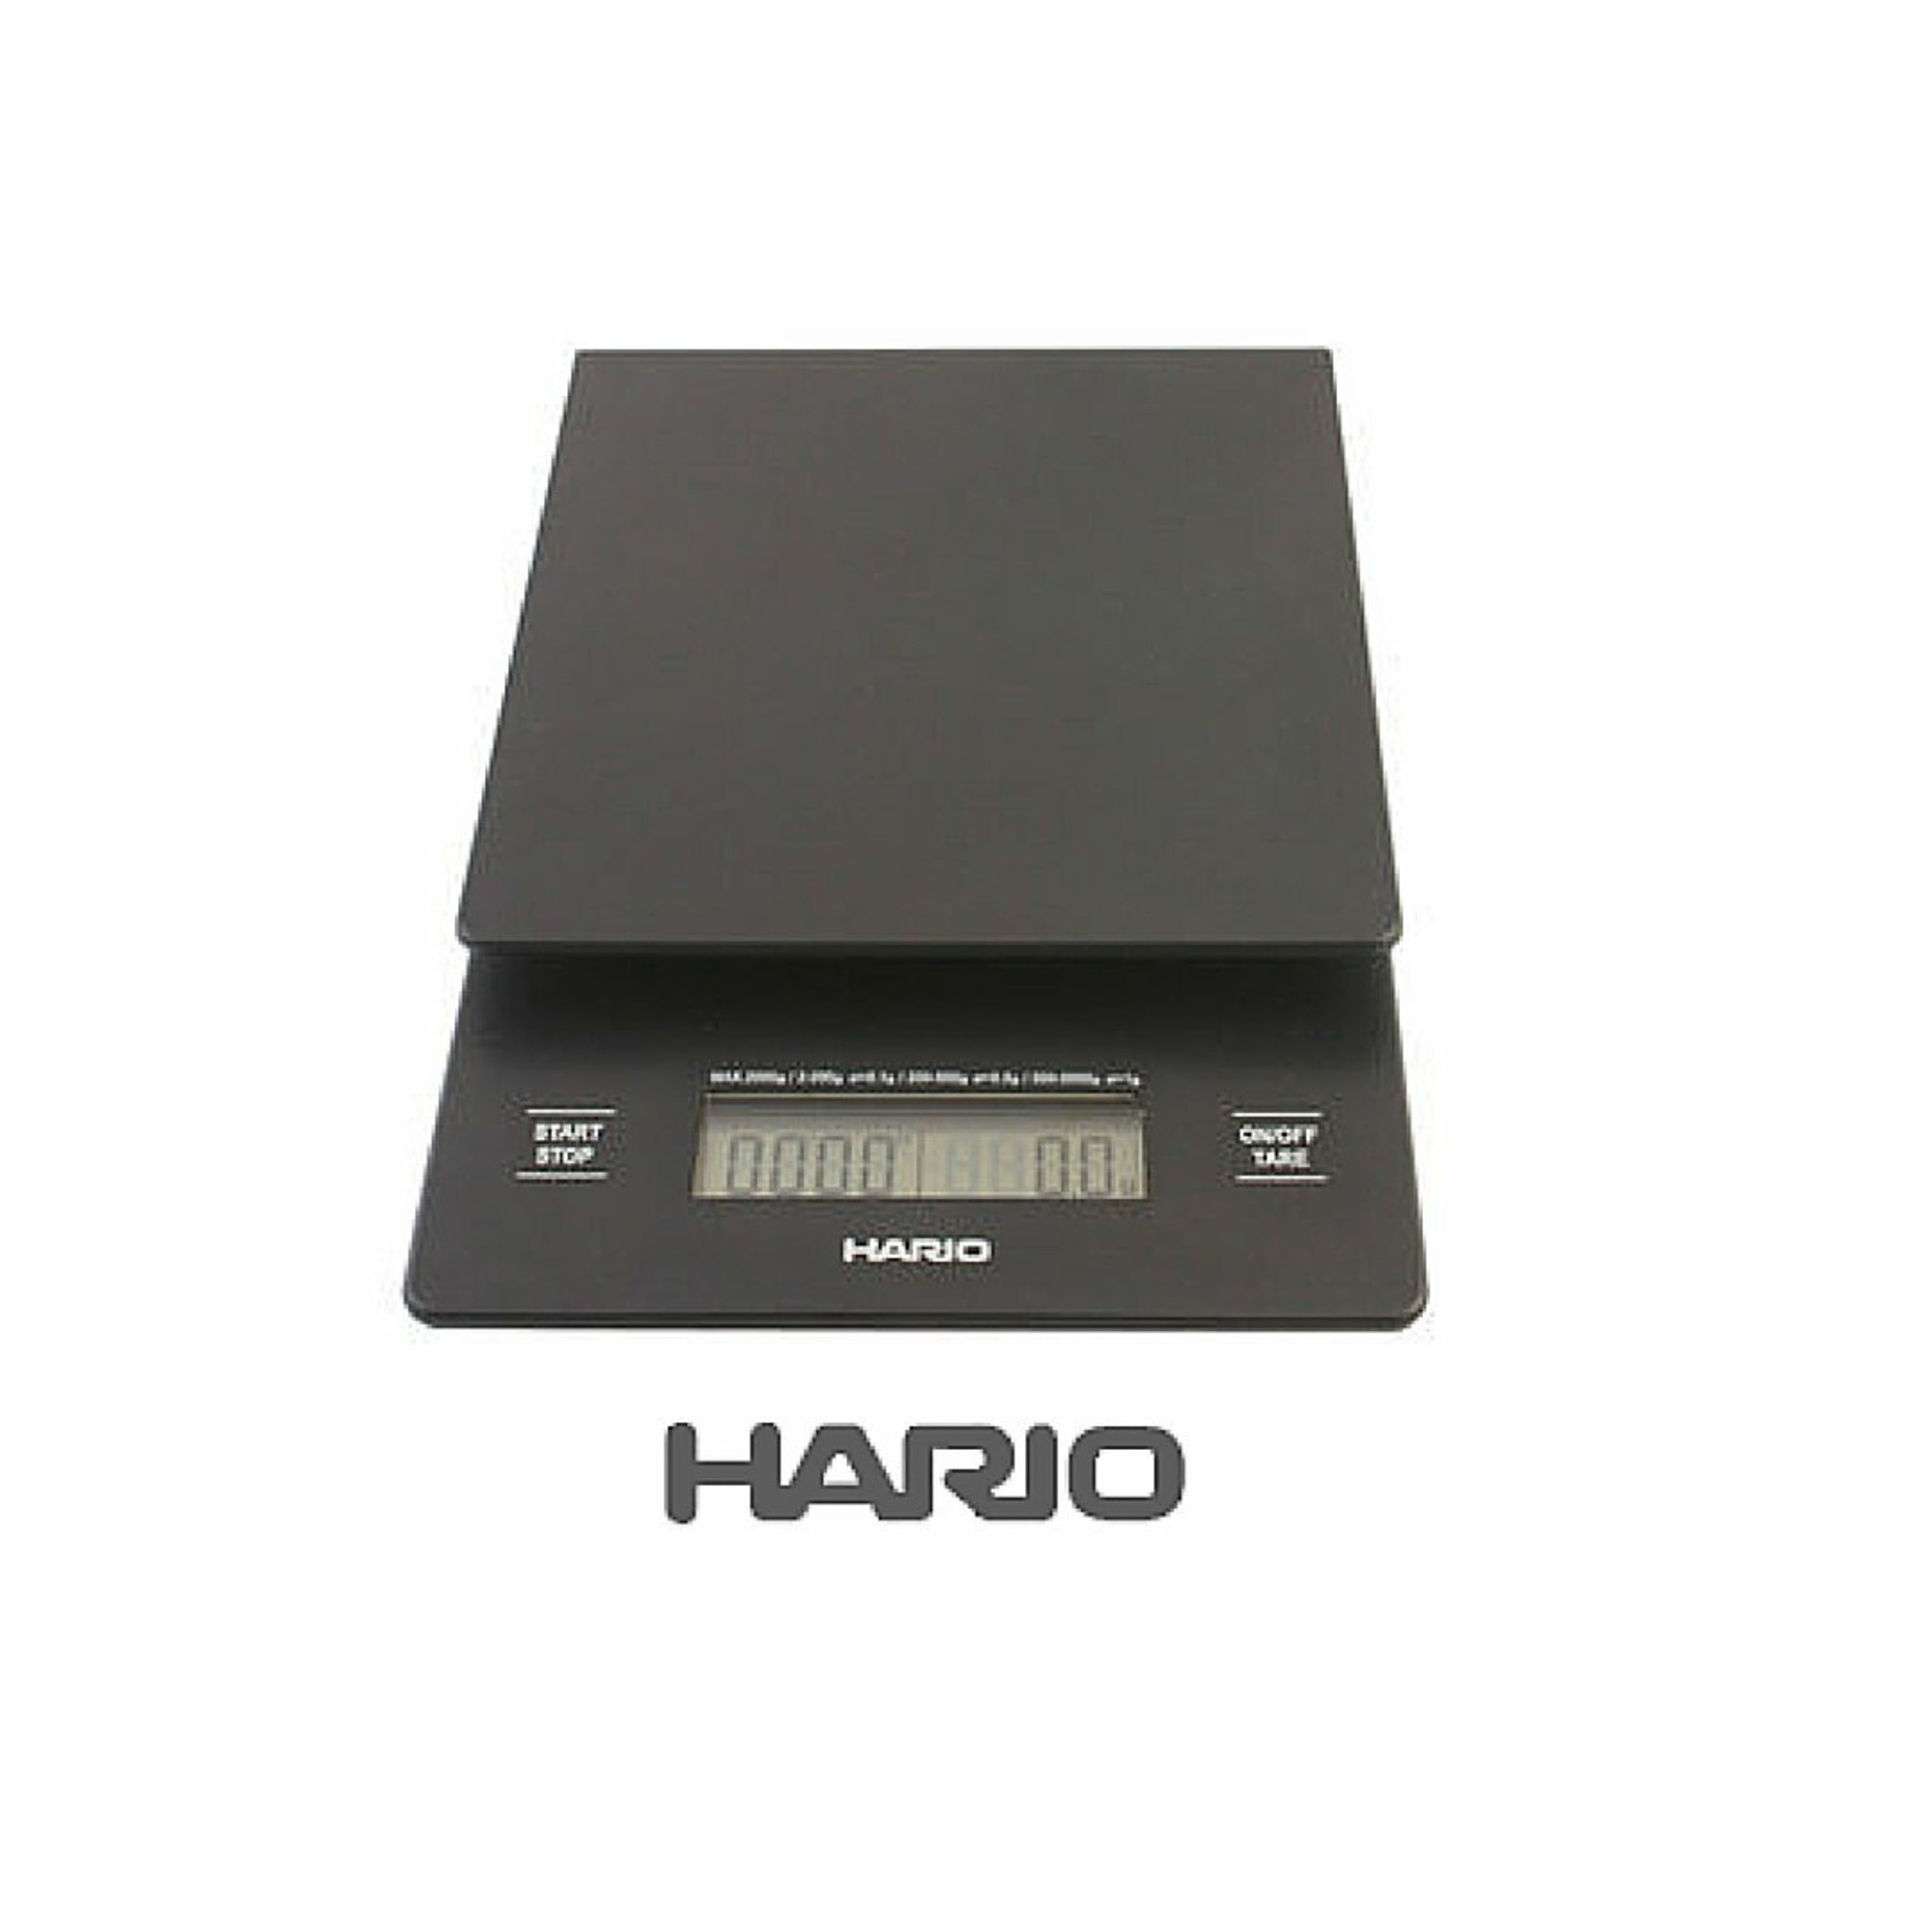 Hario Scale and Timer